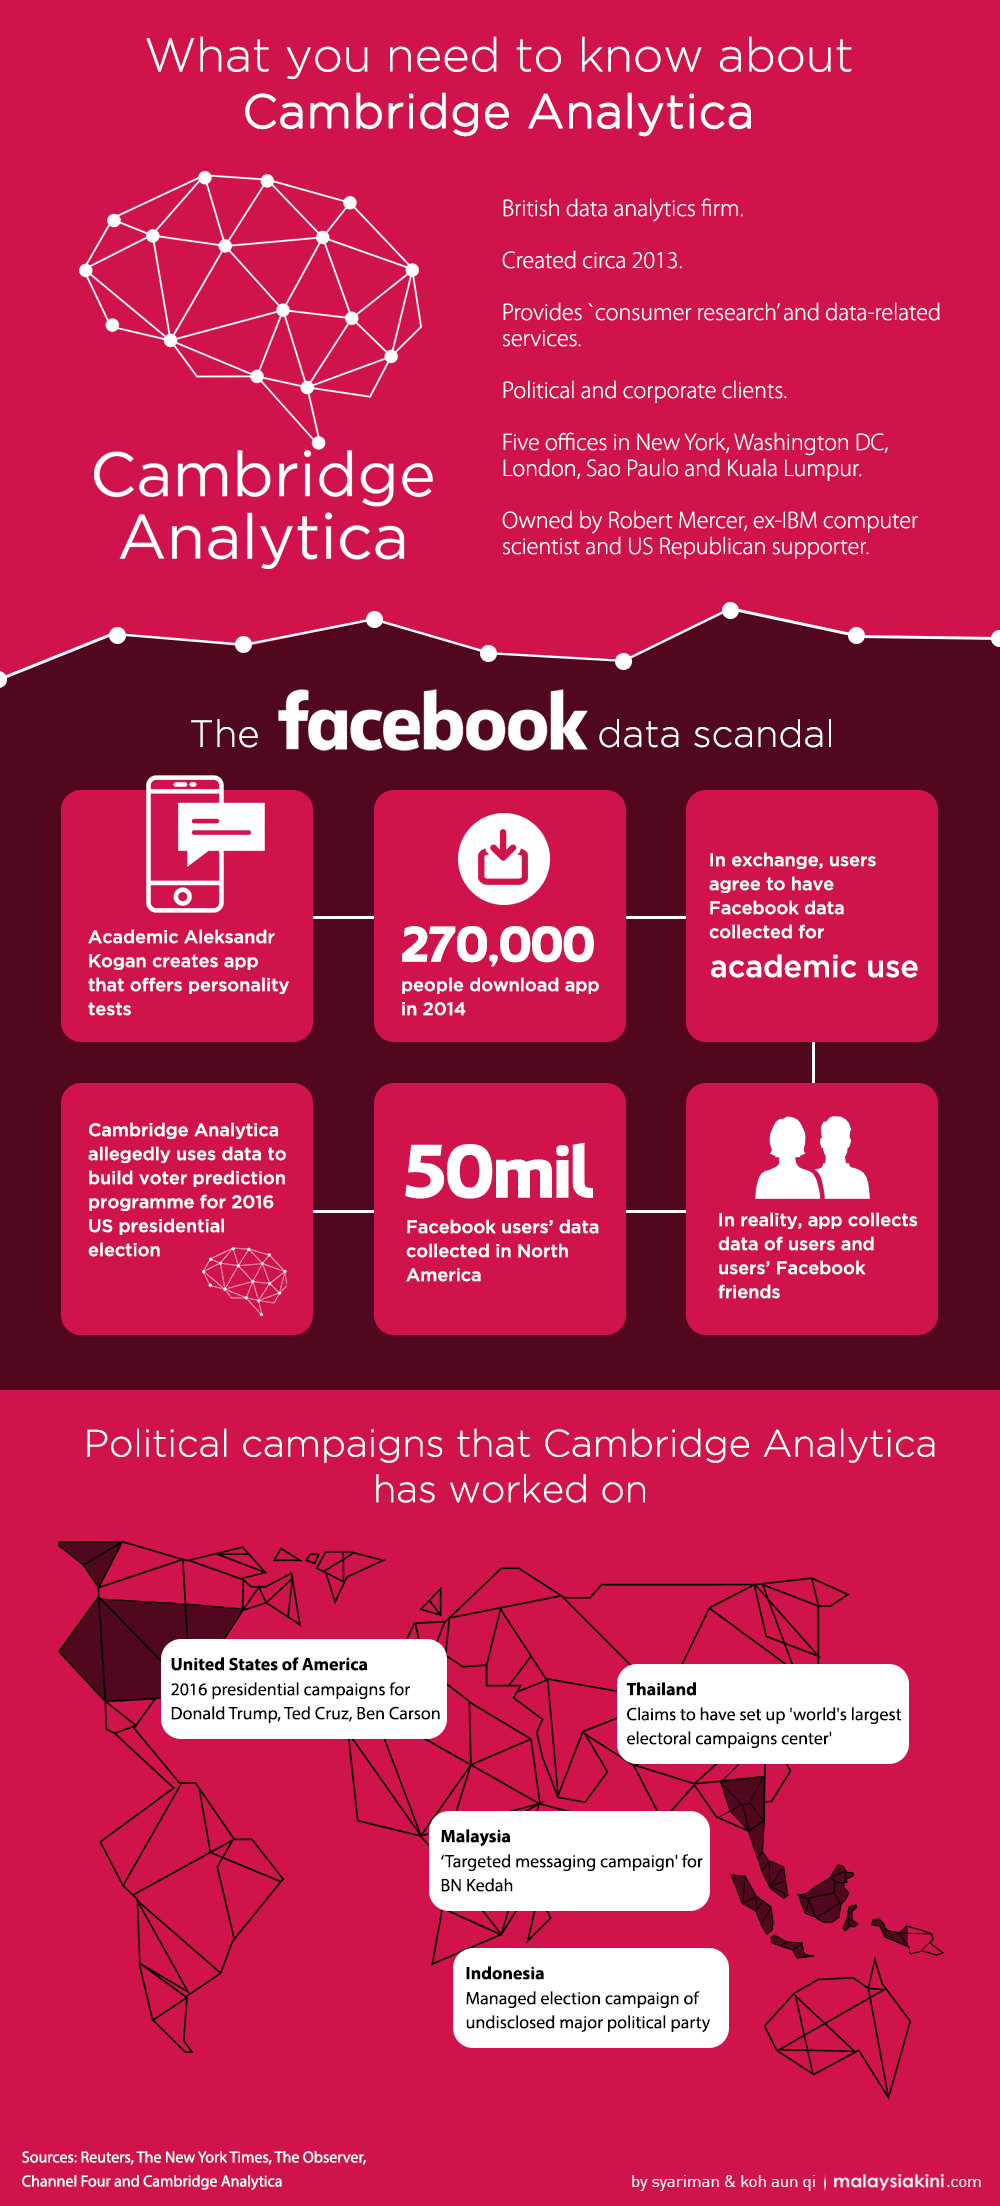 Viral Video Shows Cambridge Analytica Boasting About Interfering in Malaysia's GE13 - WORLD OF BUZZ 3